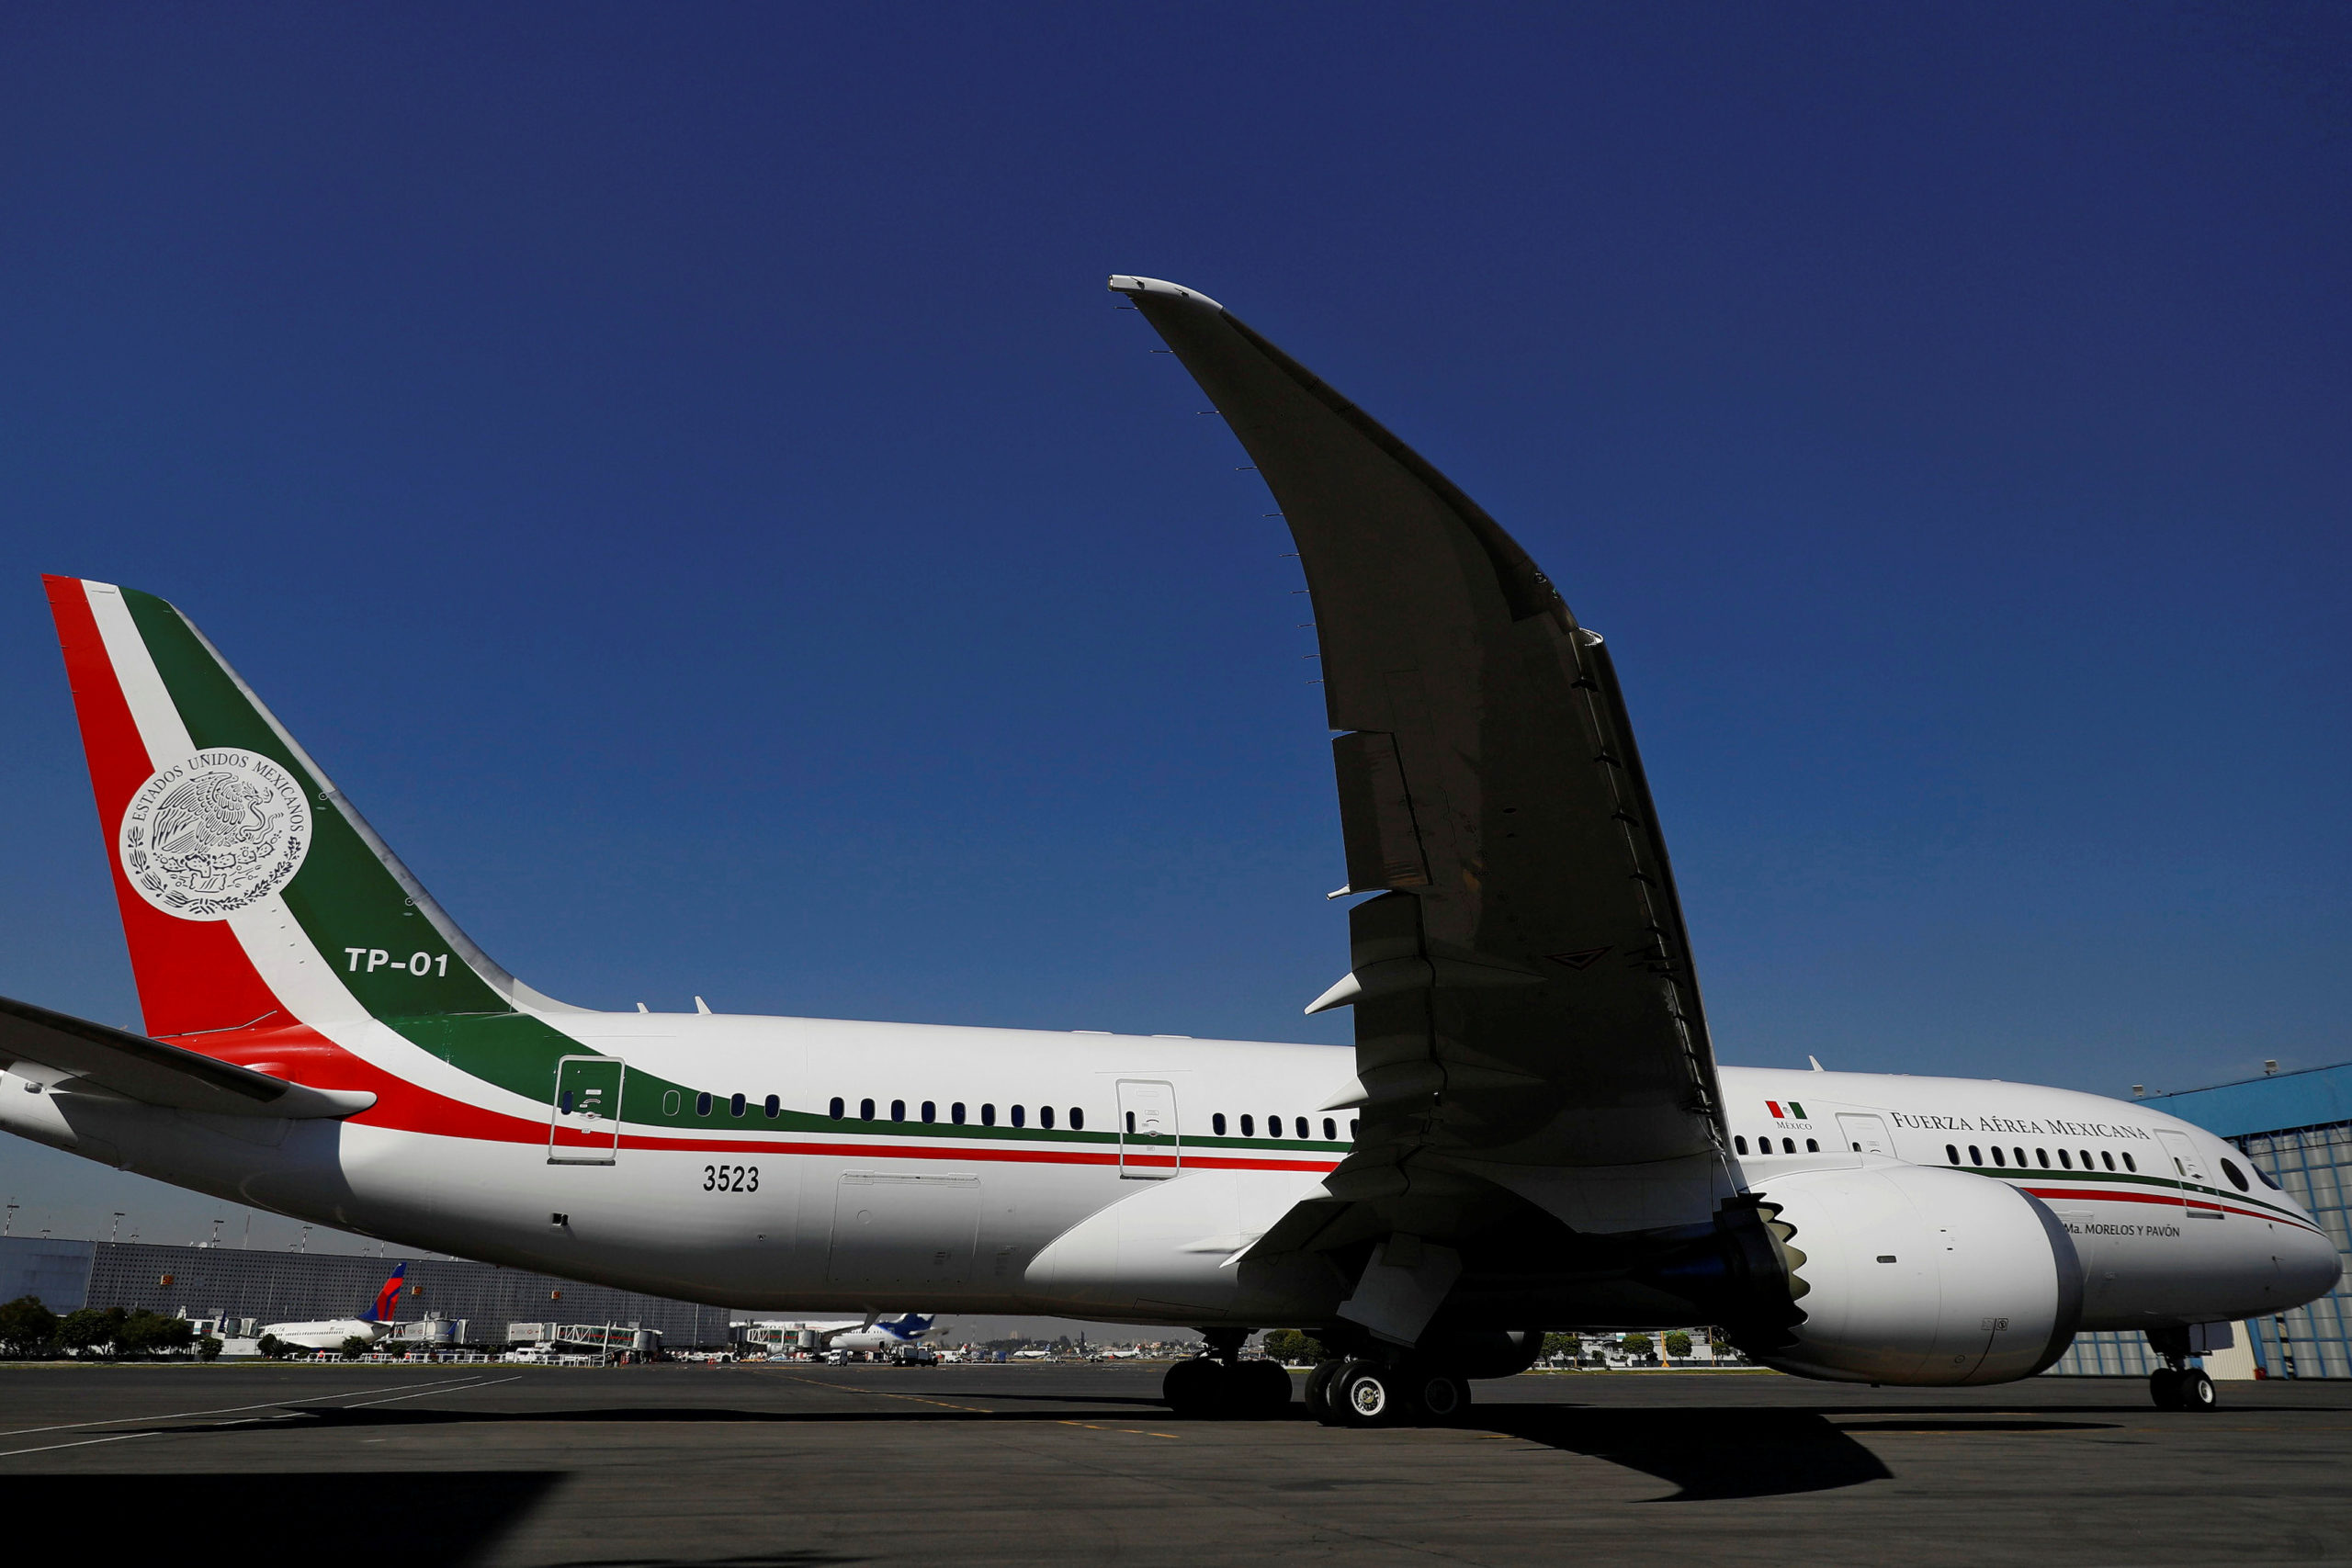 FILE PHOTO: Mexican Air Force Presidential Boeing 787-8 Dreamliner is pictured at a hangar before being put up for sale by Mexico's new President Andres Manuel Lopez Obrador, at Benito Juarez International Airport in Mexico City, Mexico December 3, 2018. REUTERS/Edgard Garrido/File Photo